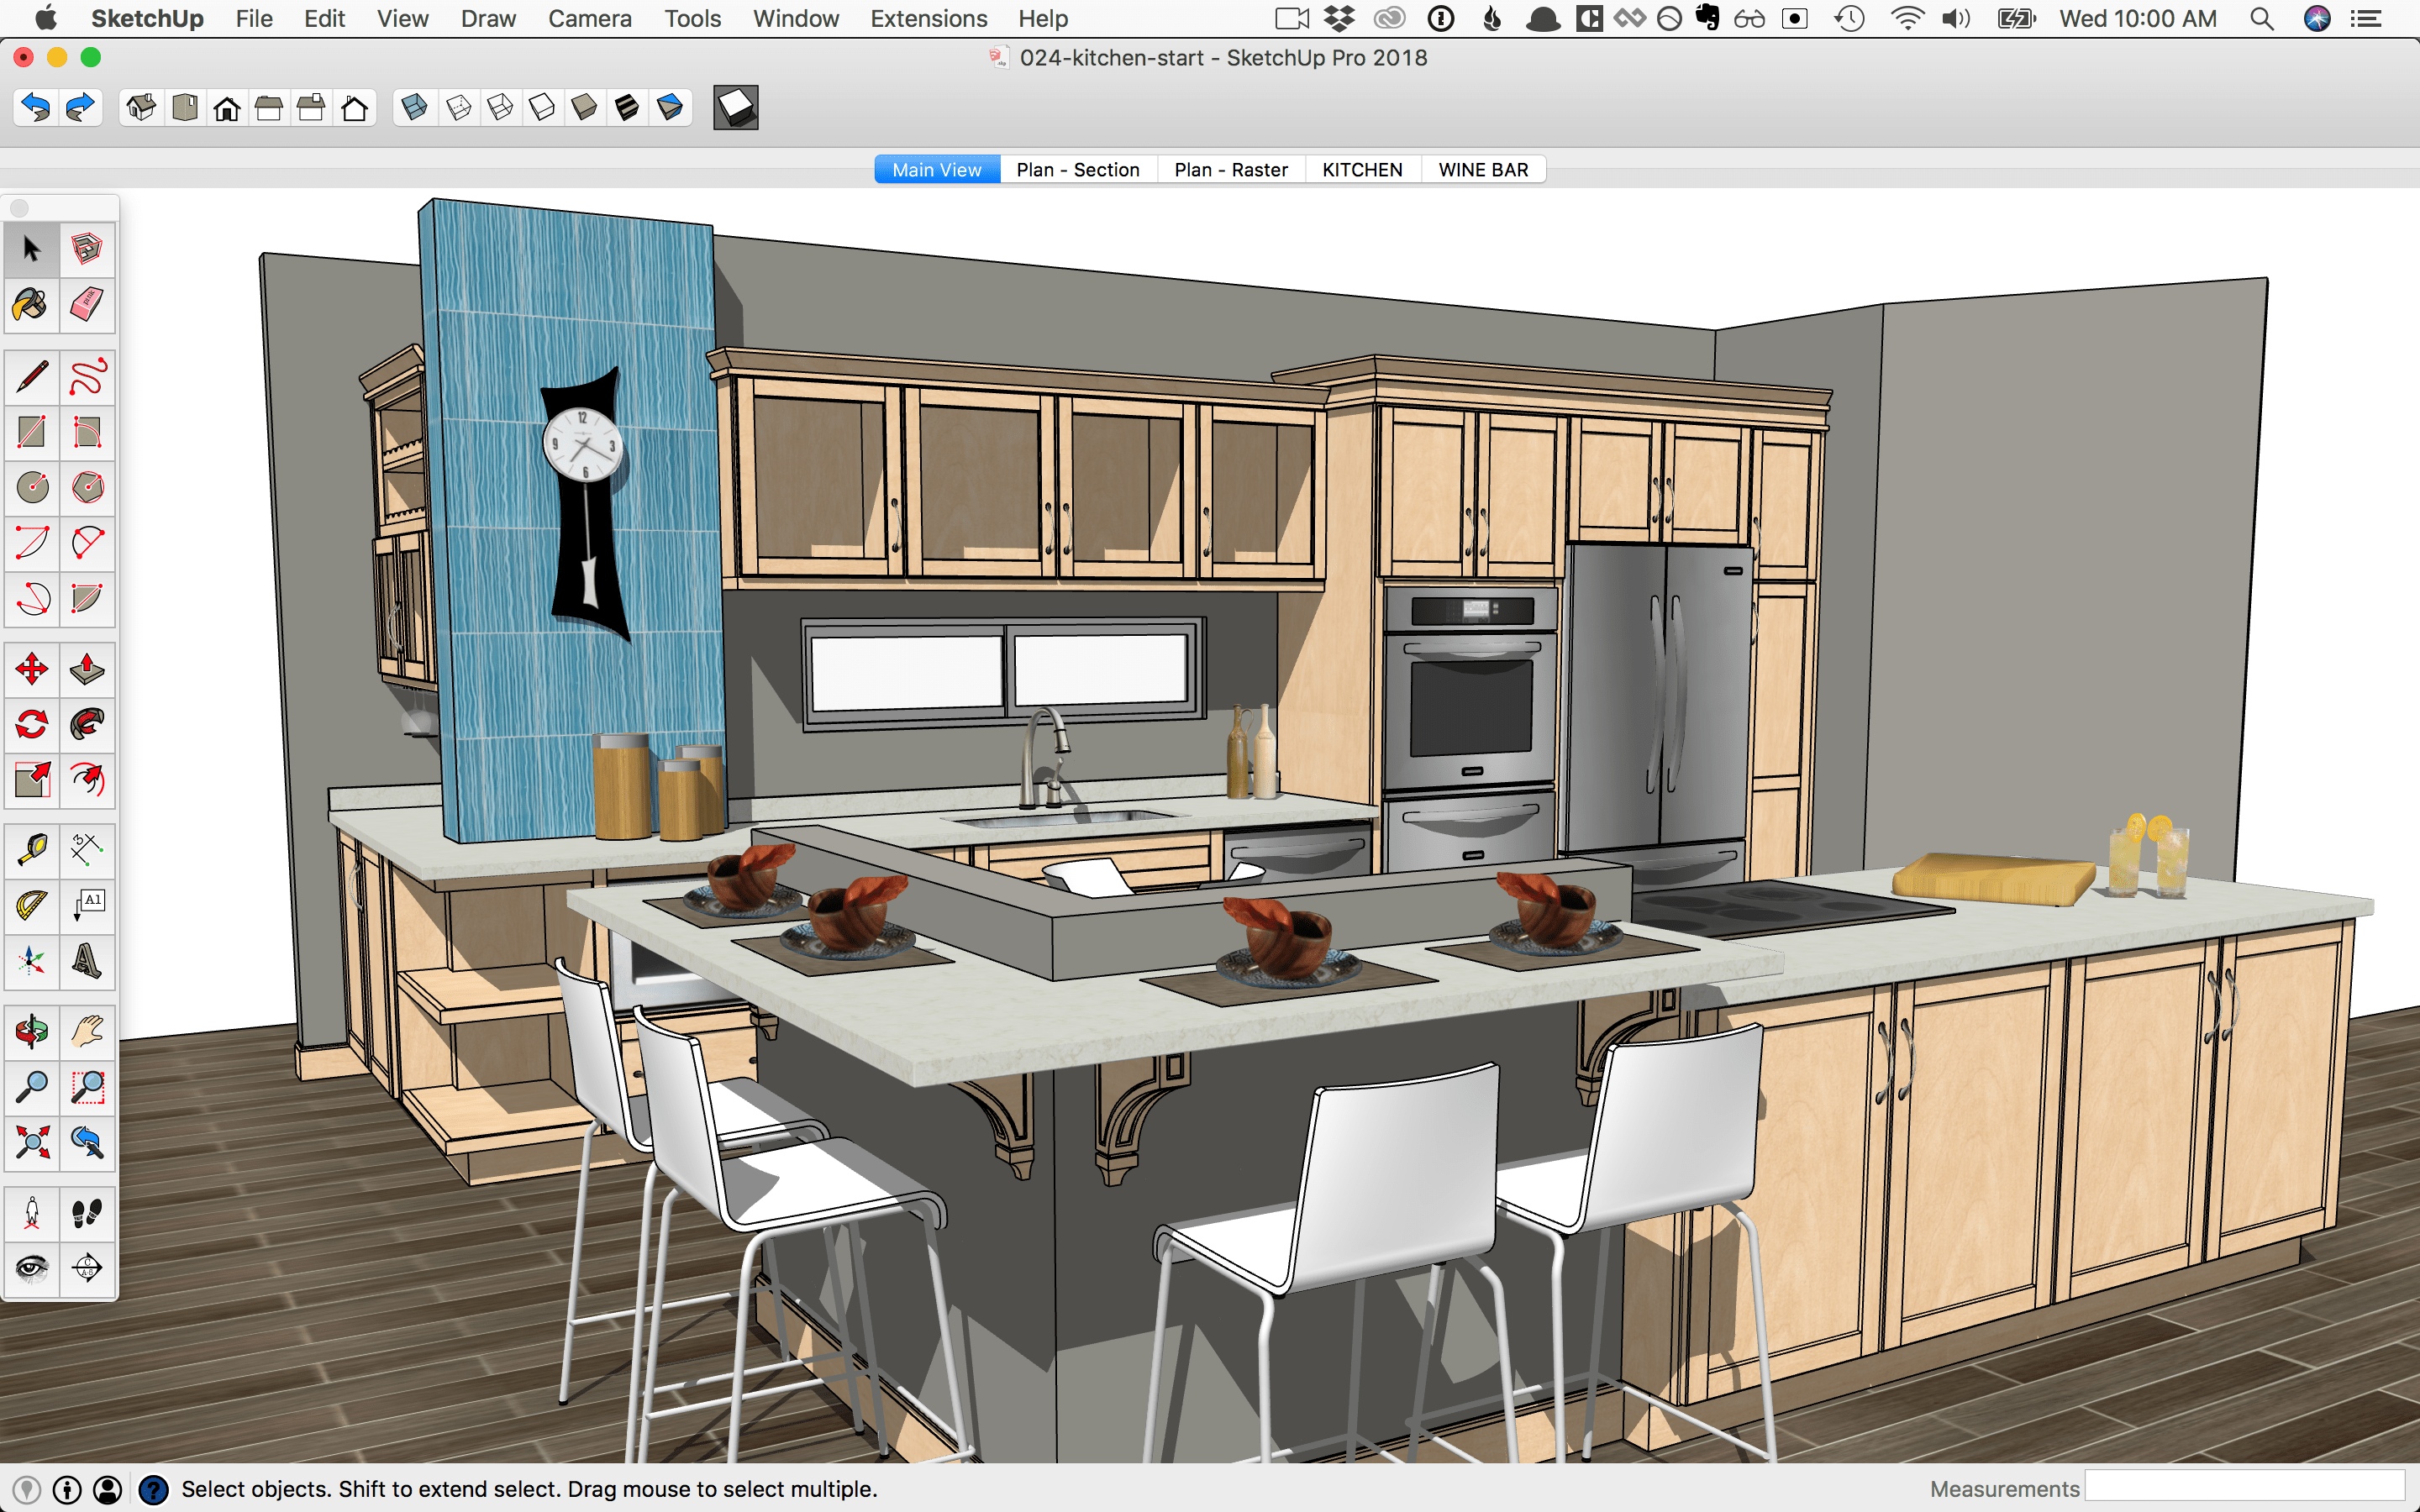 how much does sketchup cost